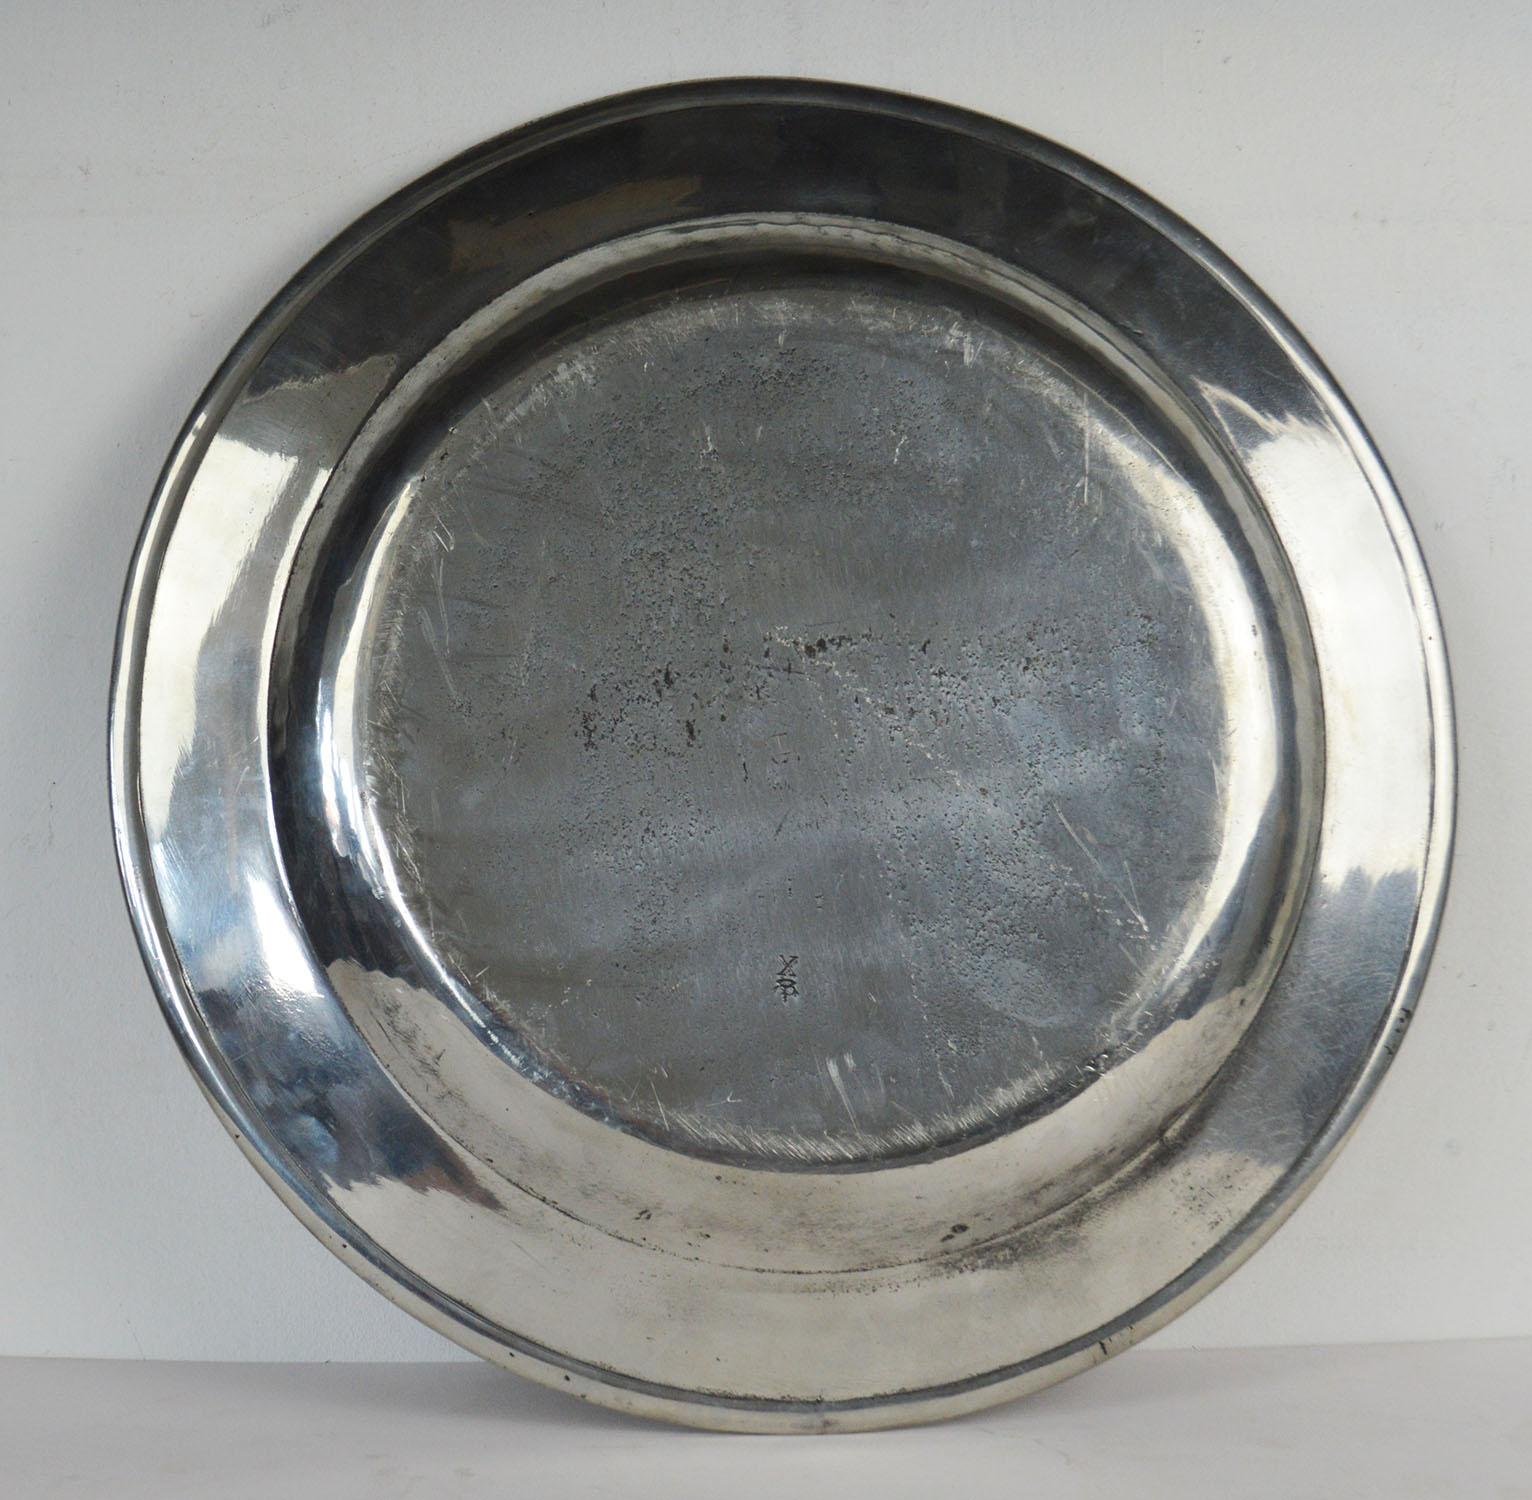  2 Antique Brightly Polished 15 inch Pewter Chargers, English, 18th Century 2